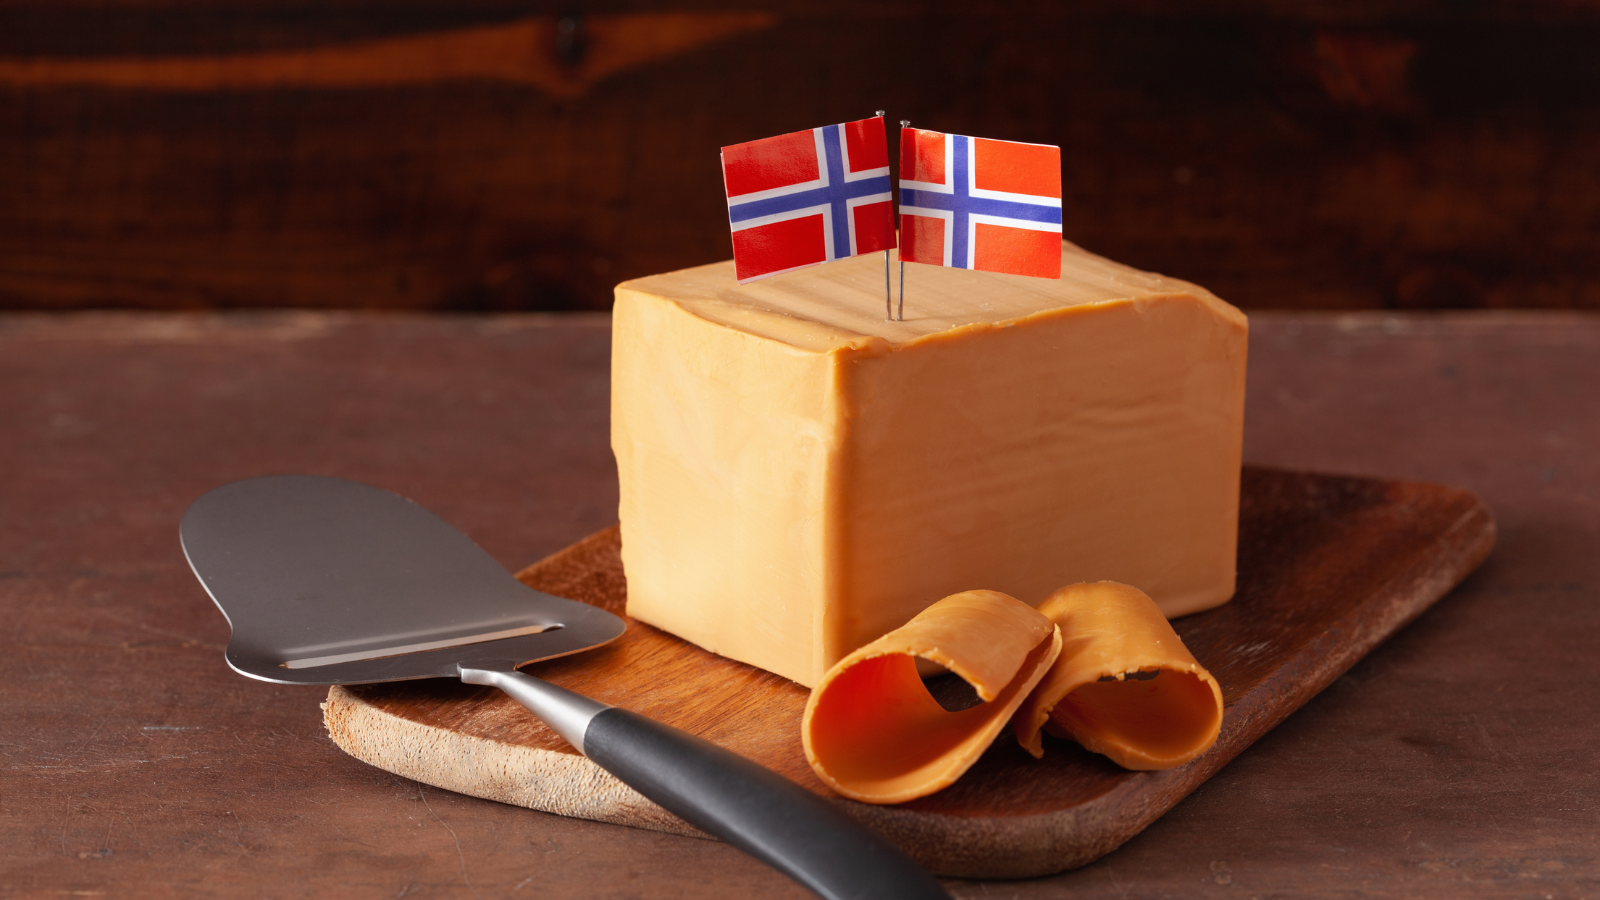 Brunost (Brown Cheese) - gifts from coach rental in Norway